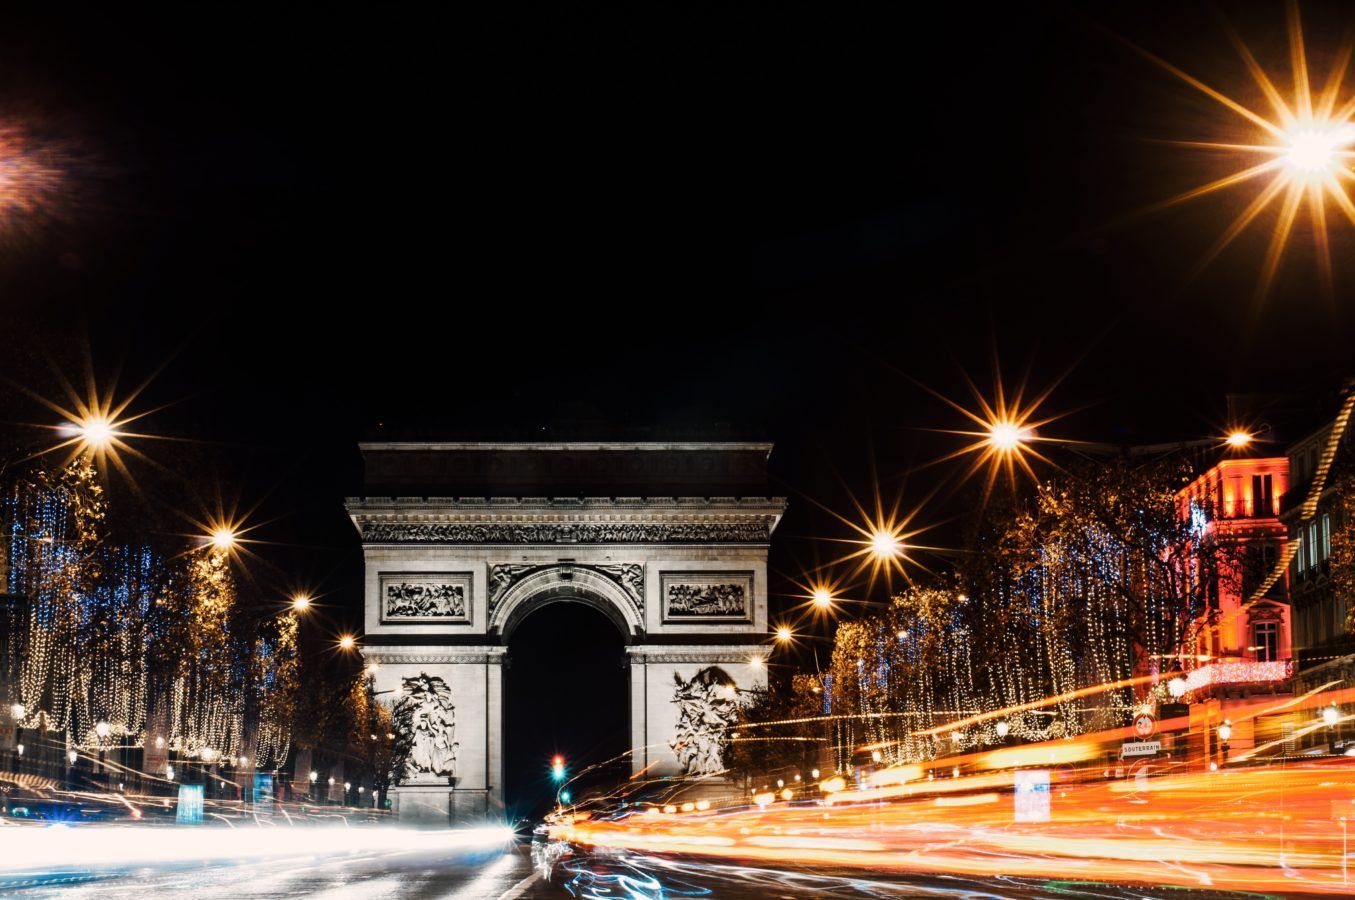 Champs-Élysées in Paris will be turned into a new “extraordinary garden”, says mayor